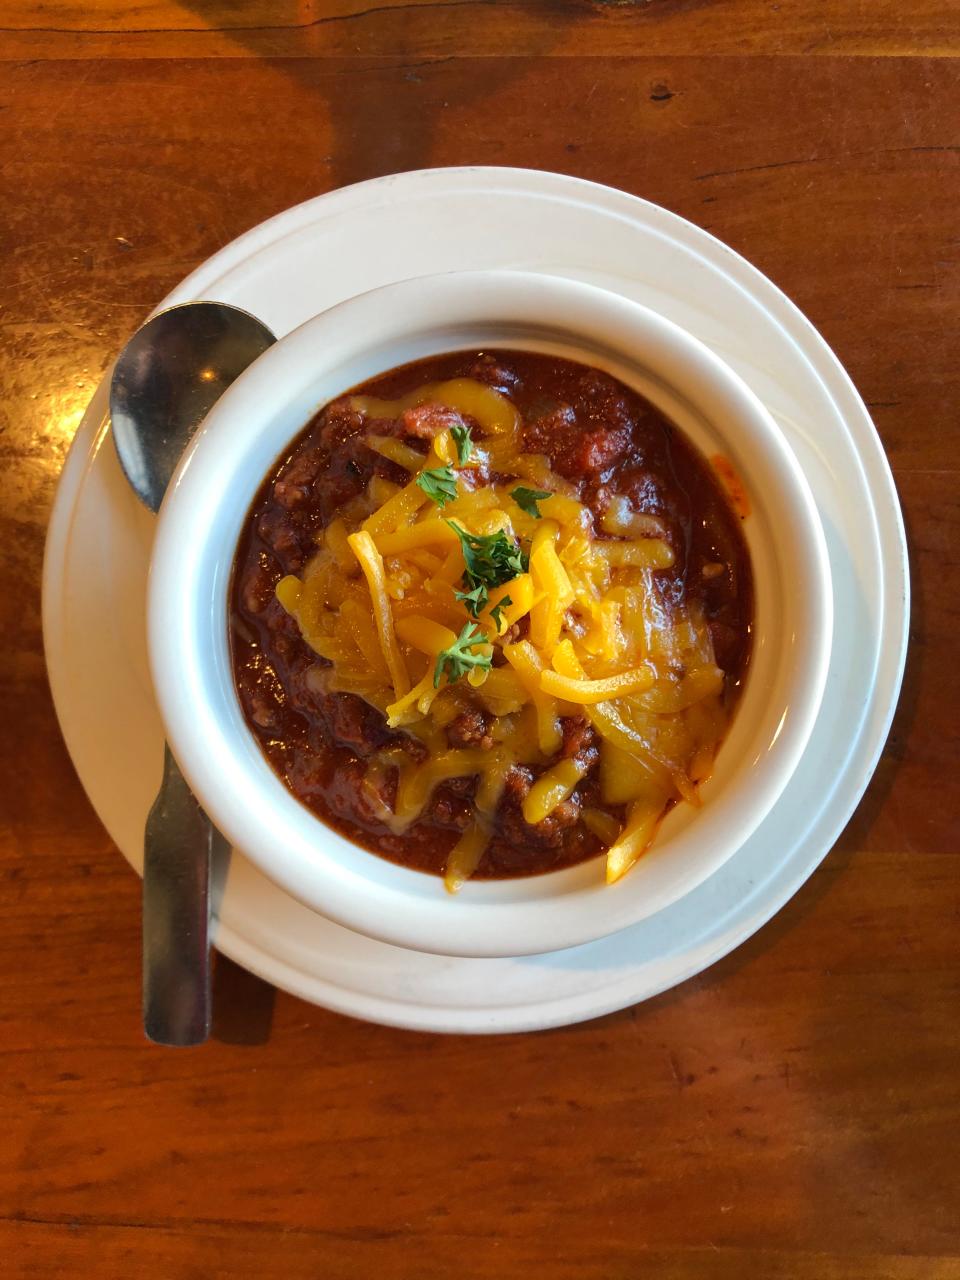 Voodoo chili is one of the soups available at Lennie's and Hive.